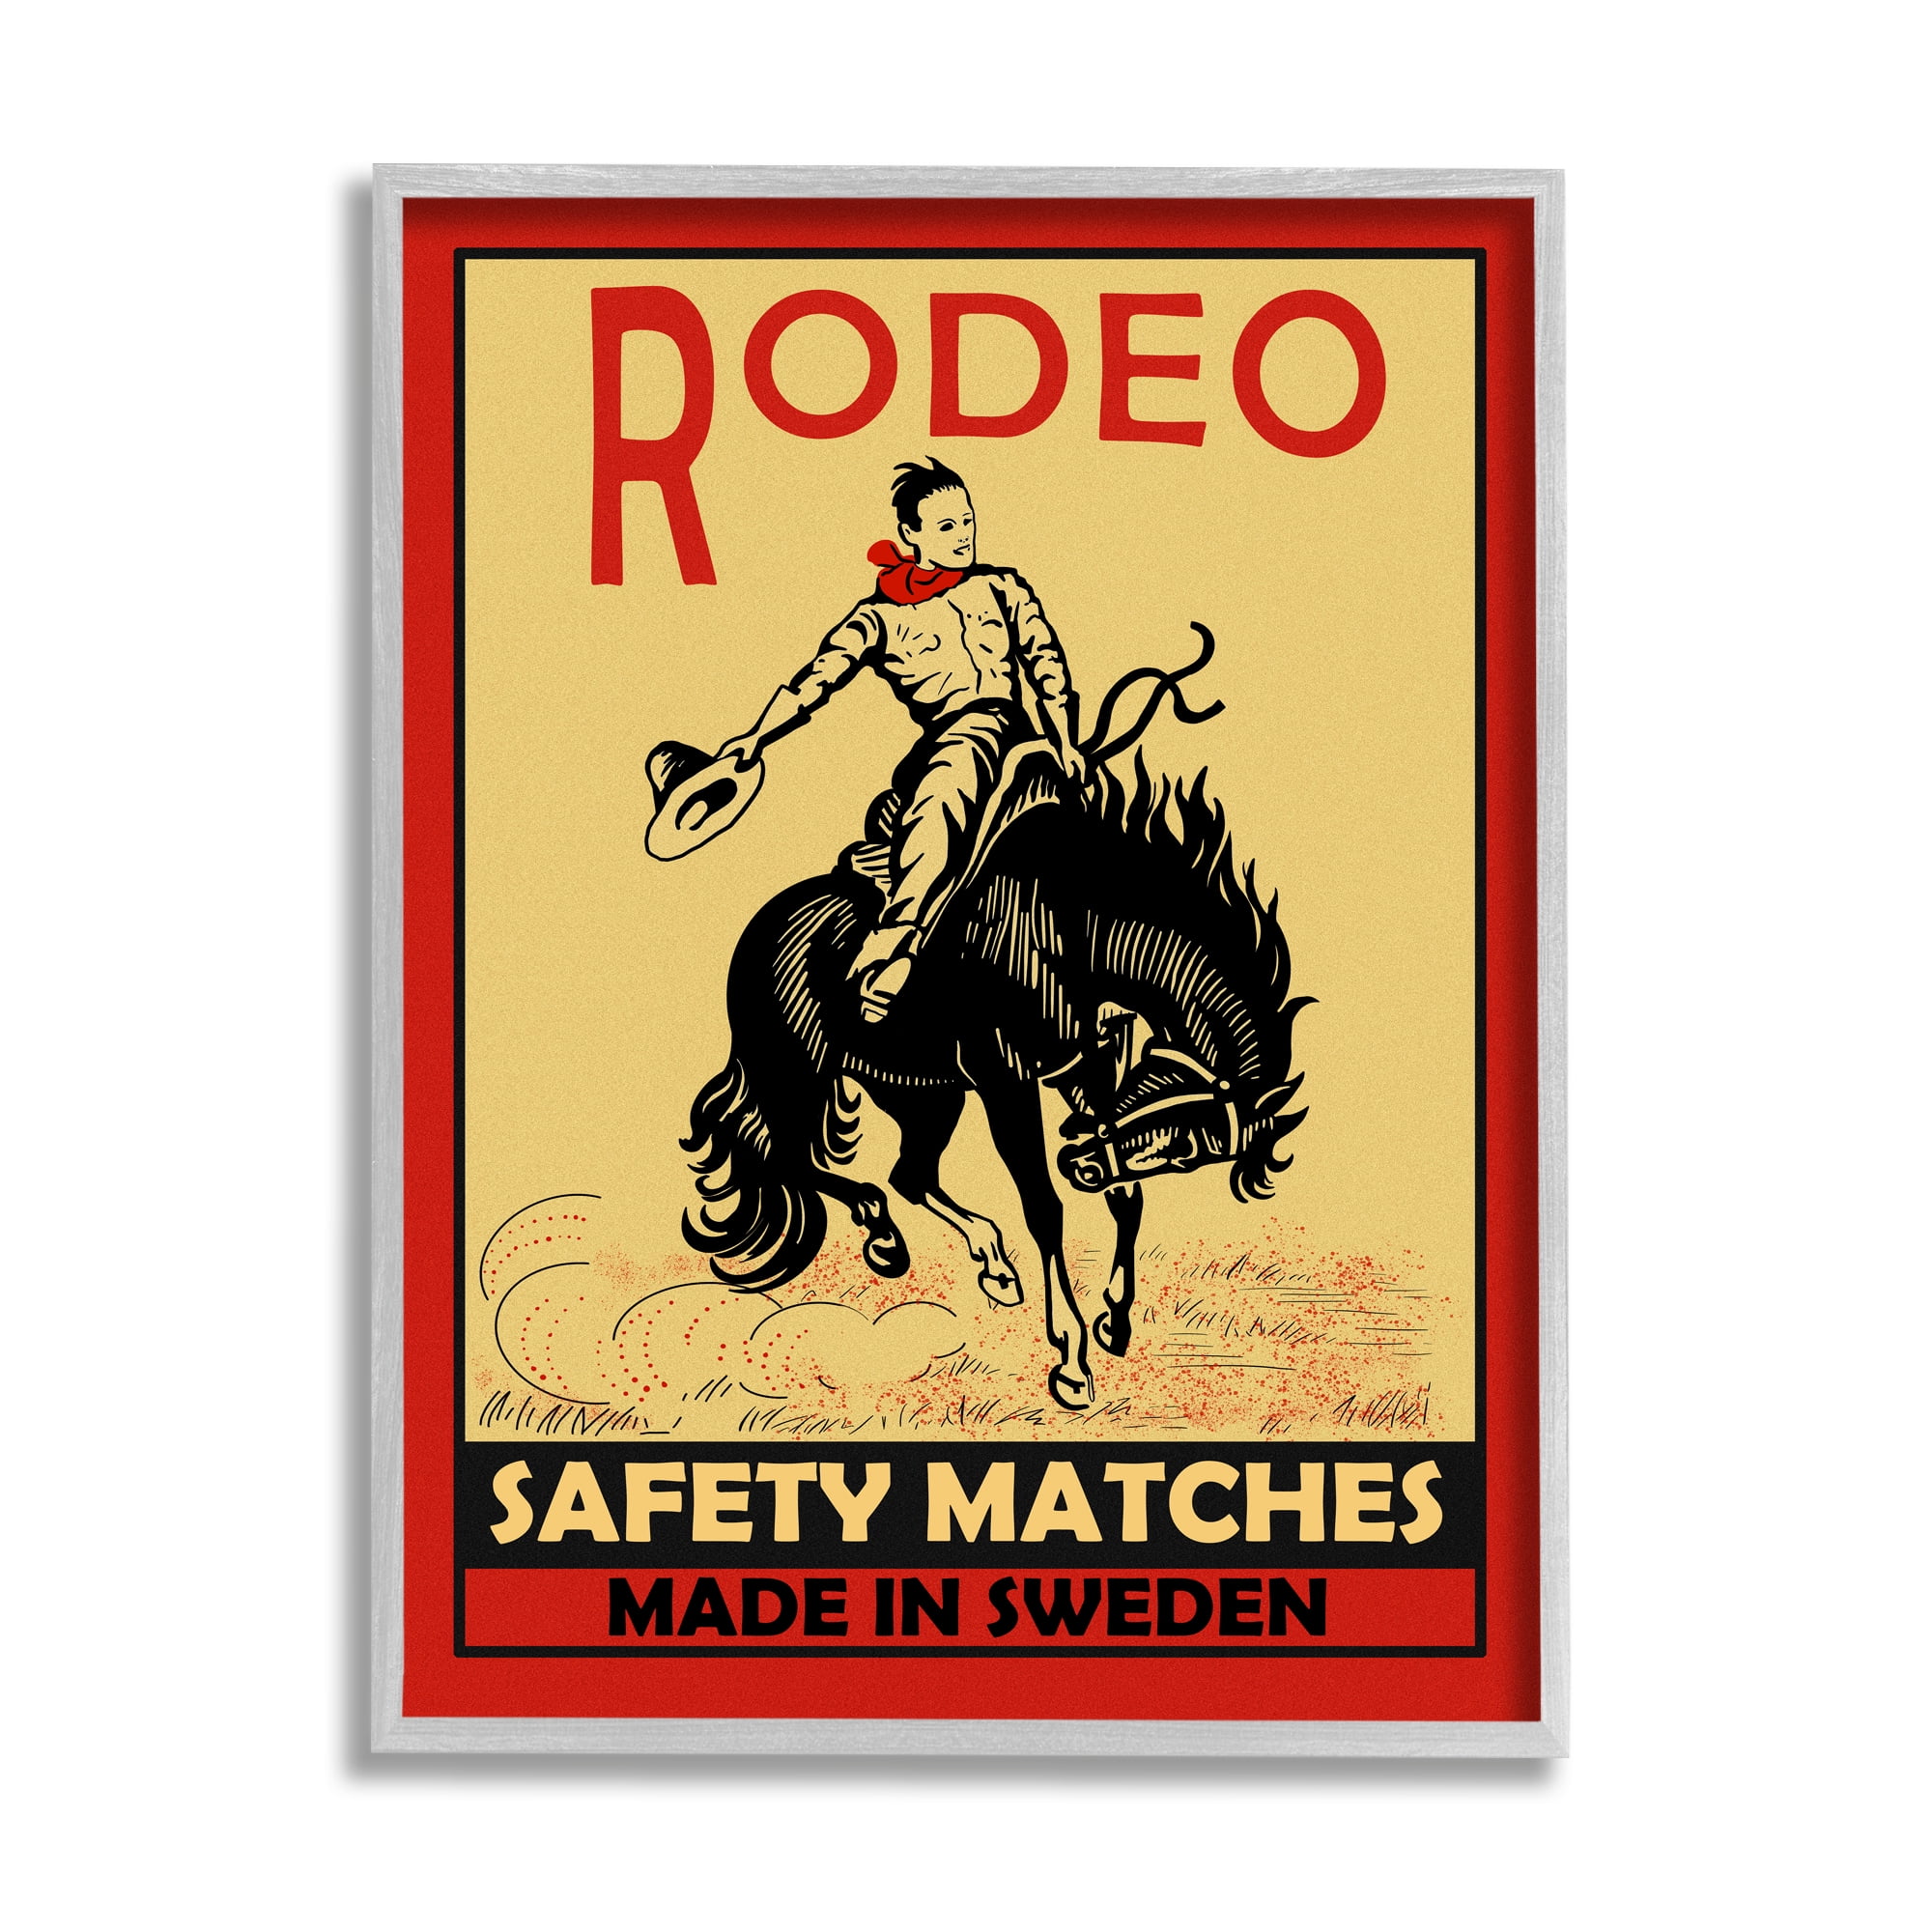 HAND PAINTED WOOD SIGN "RODEO" WESTERN BRONC RIDER COWBOY RUSTIC Cowboy sign 